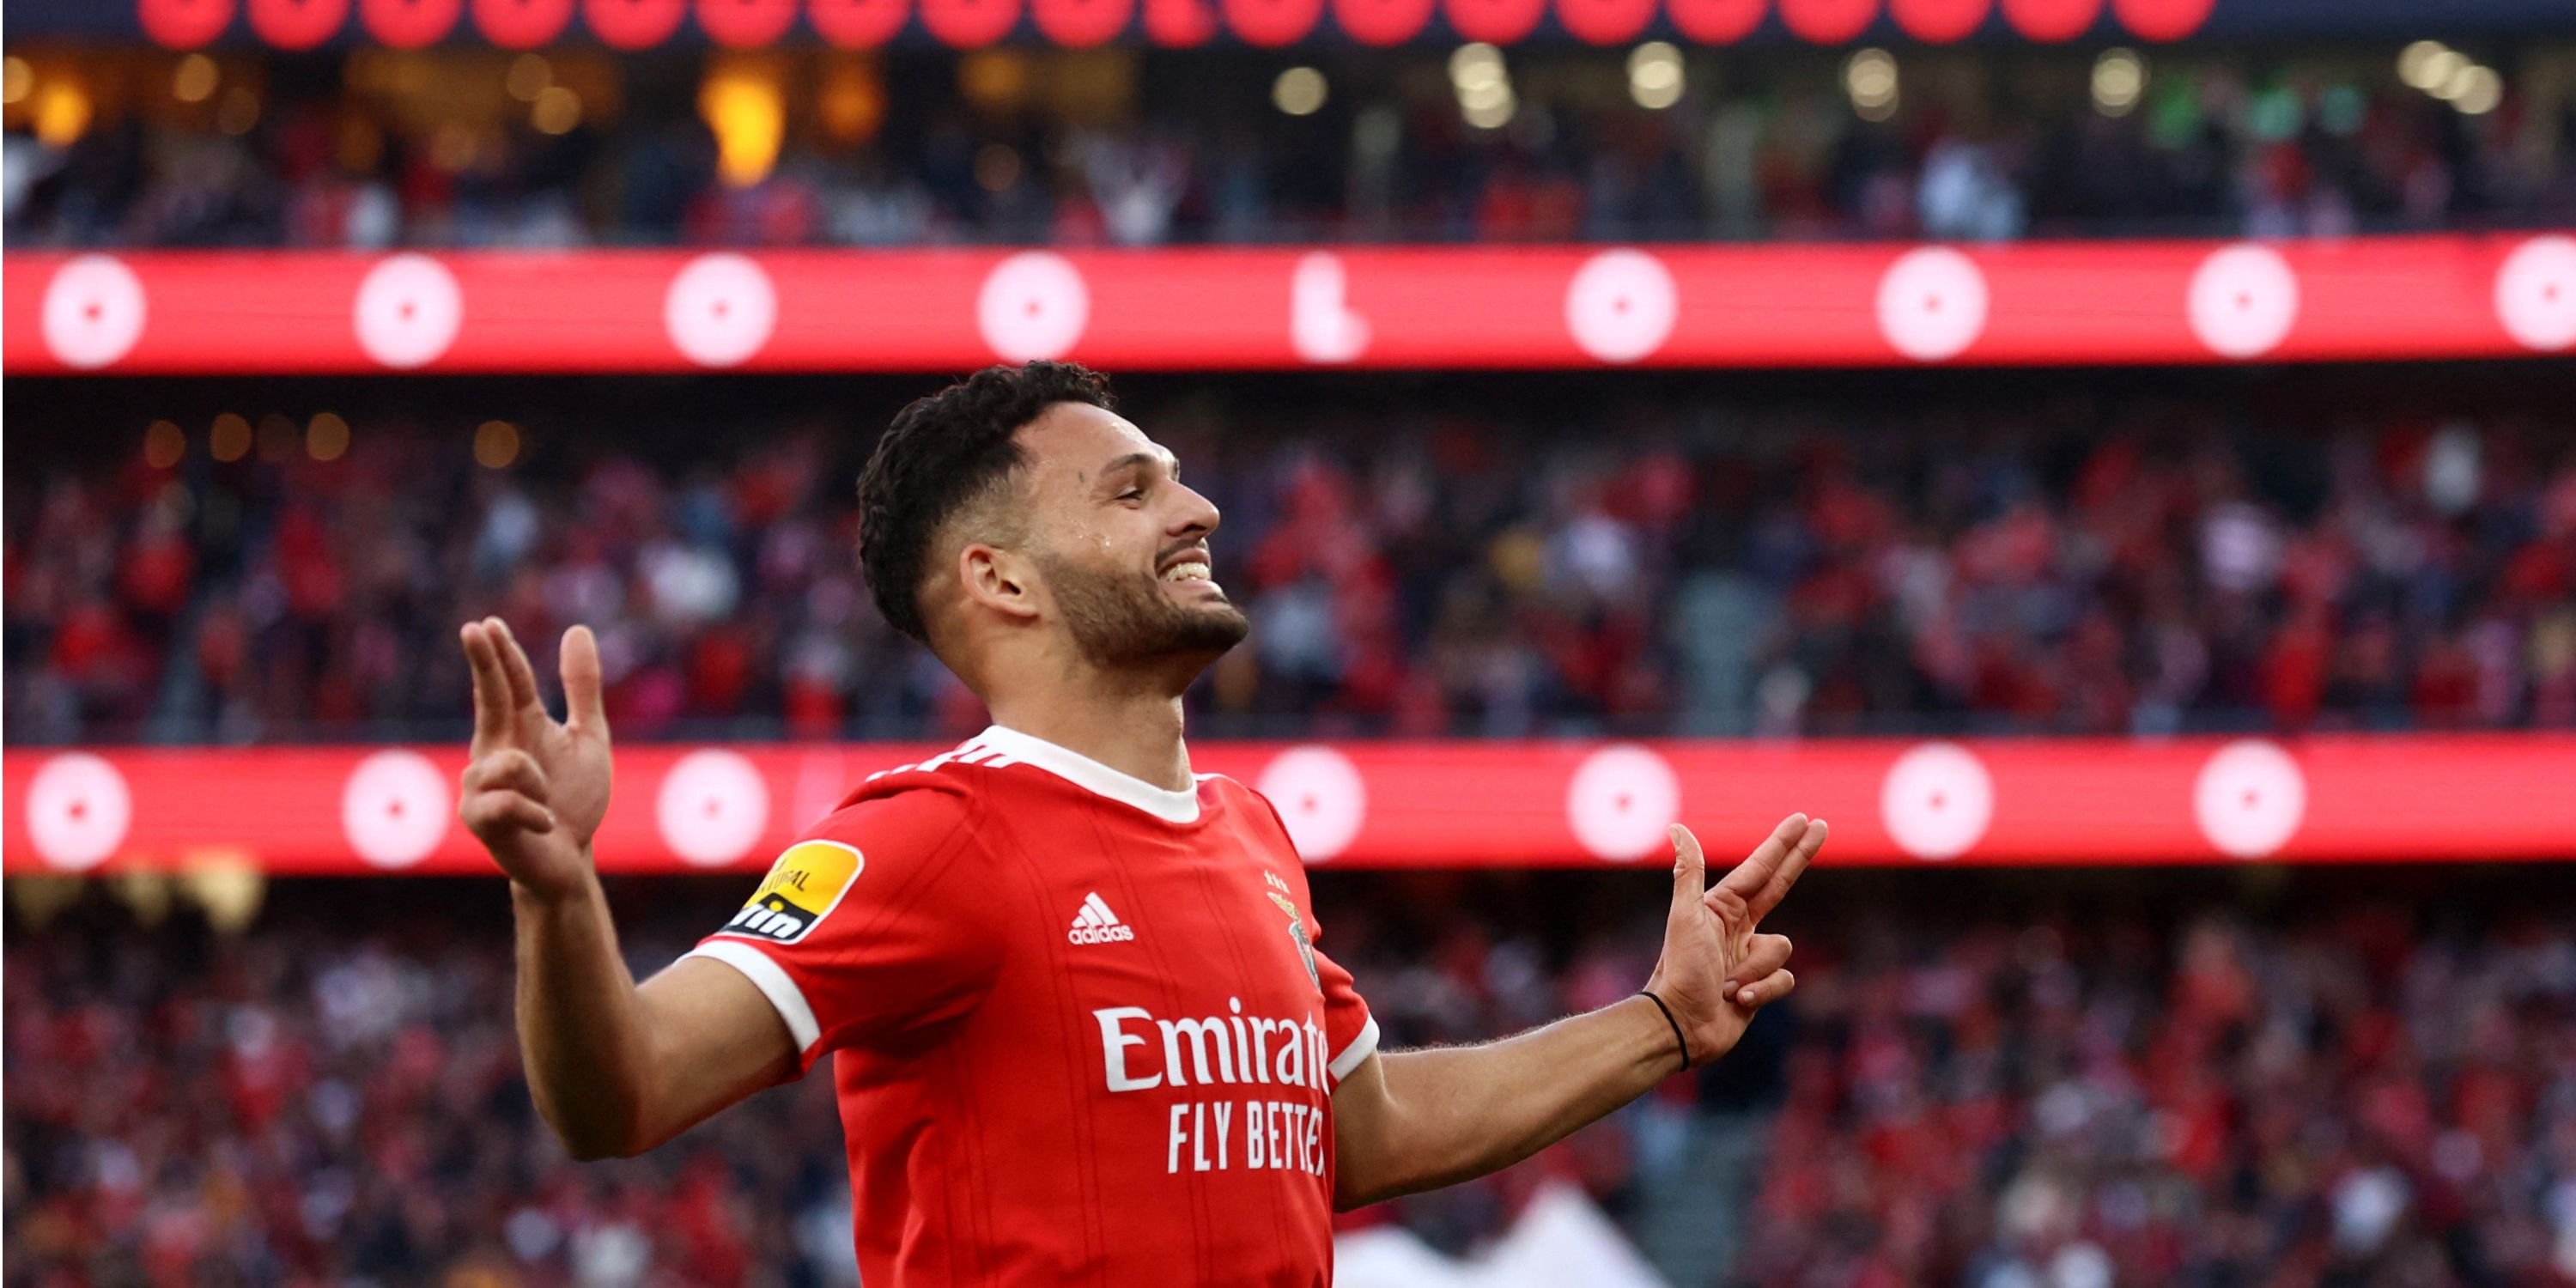 Goncalo Ramos for Benfica